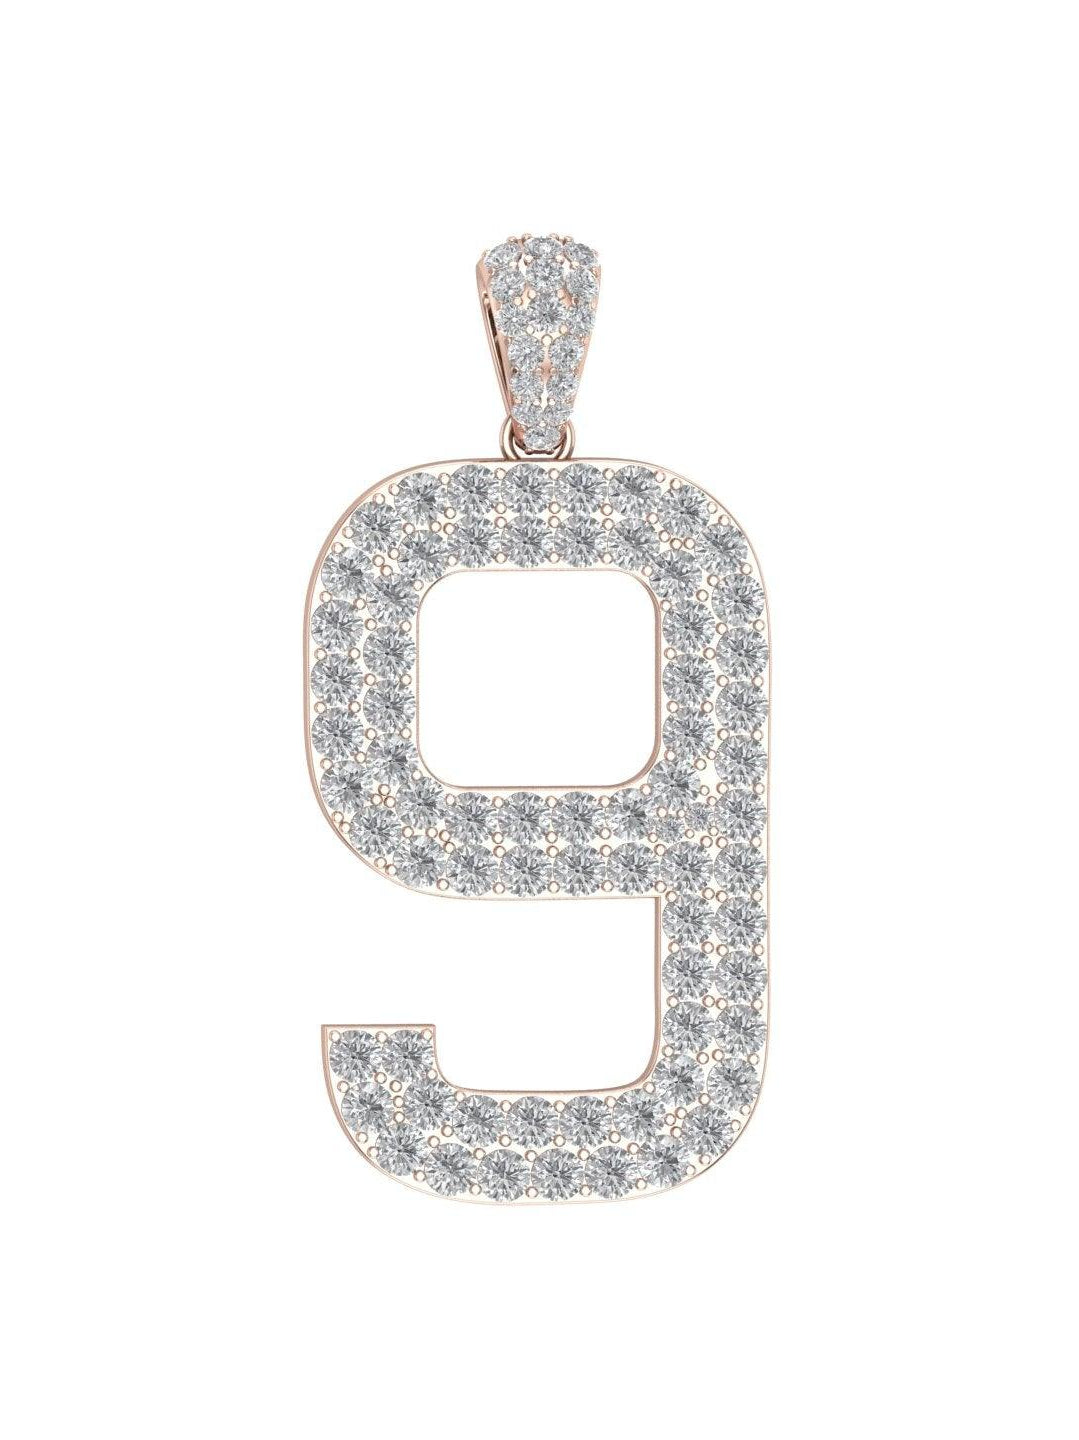 Rose Gold Color Pendant in the Shape of 9 Made of 925 Sterling Silver Material with 20 Inch Long Silver Chain